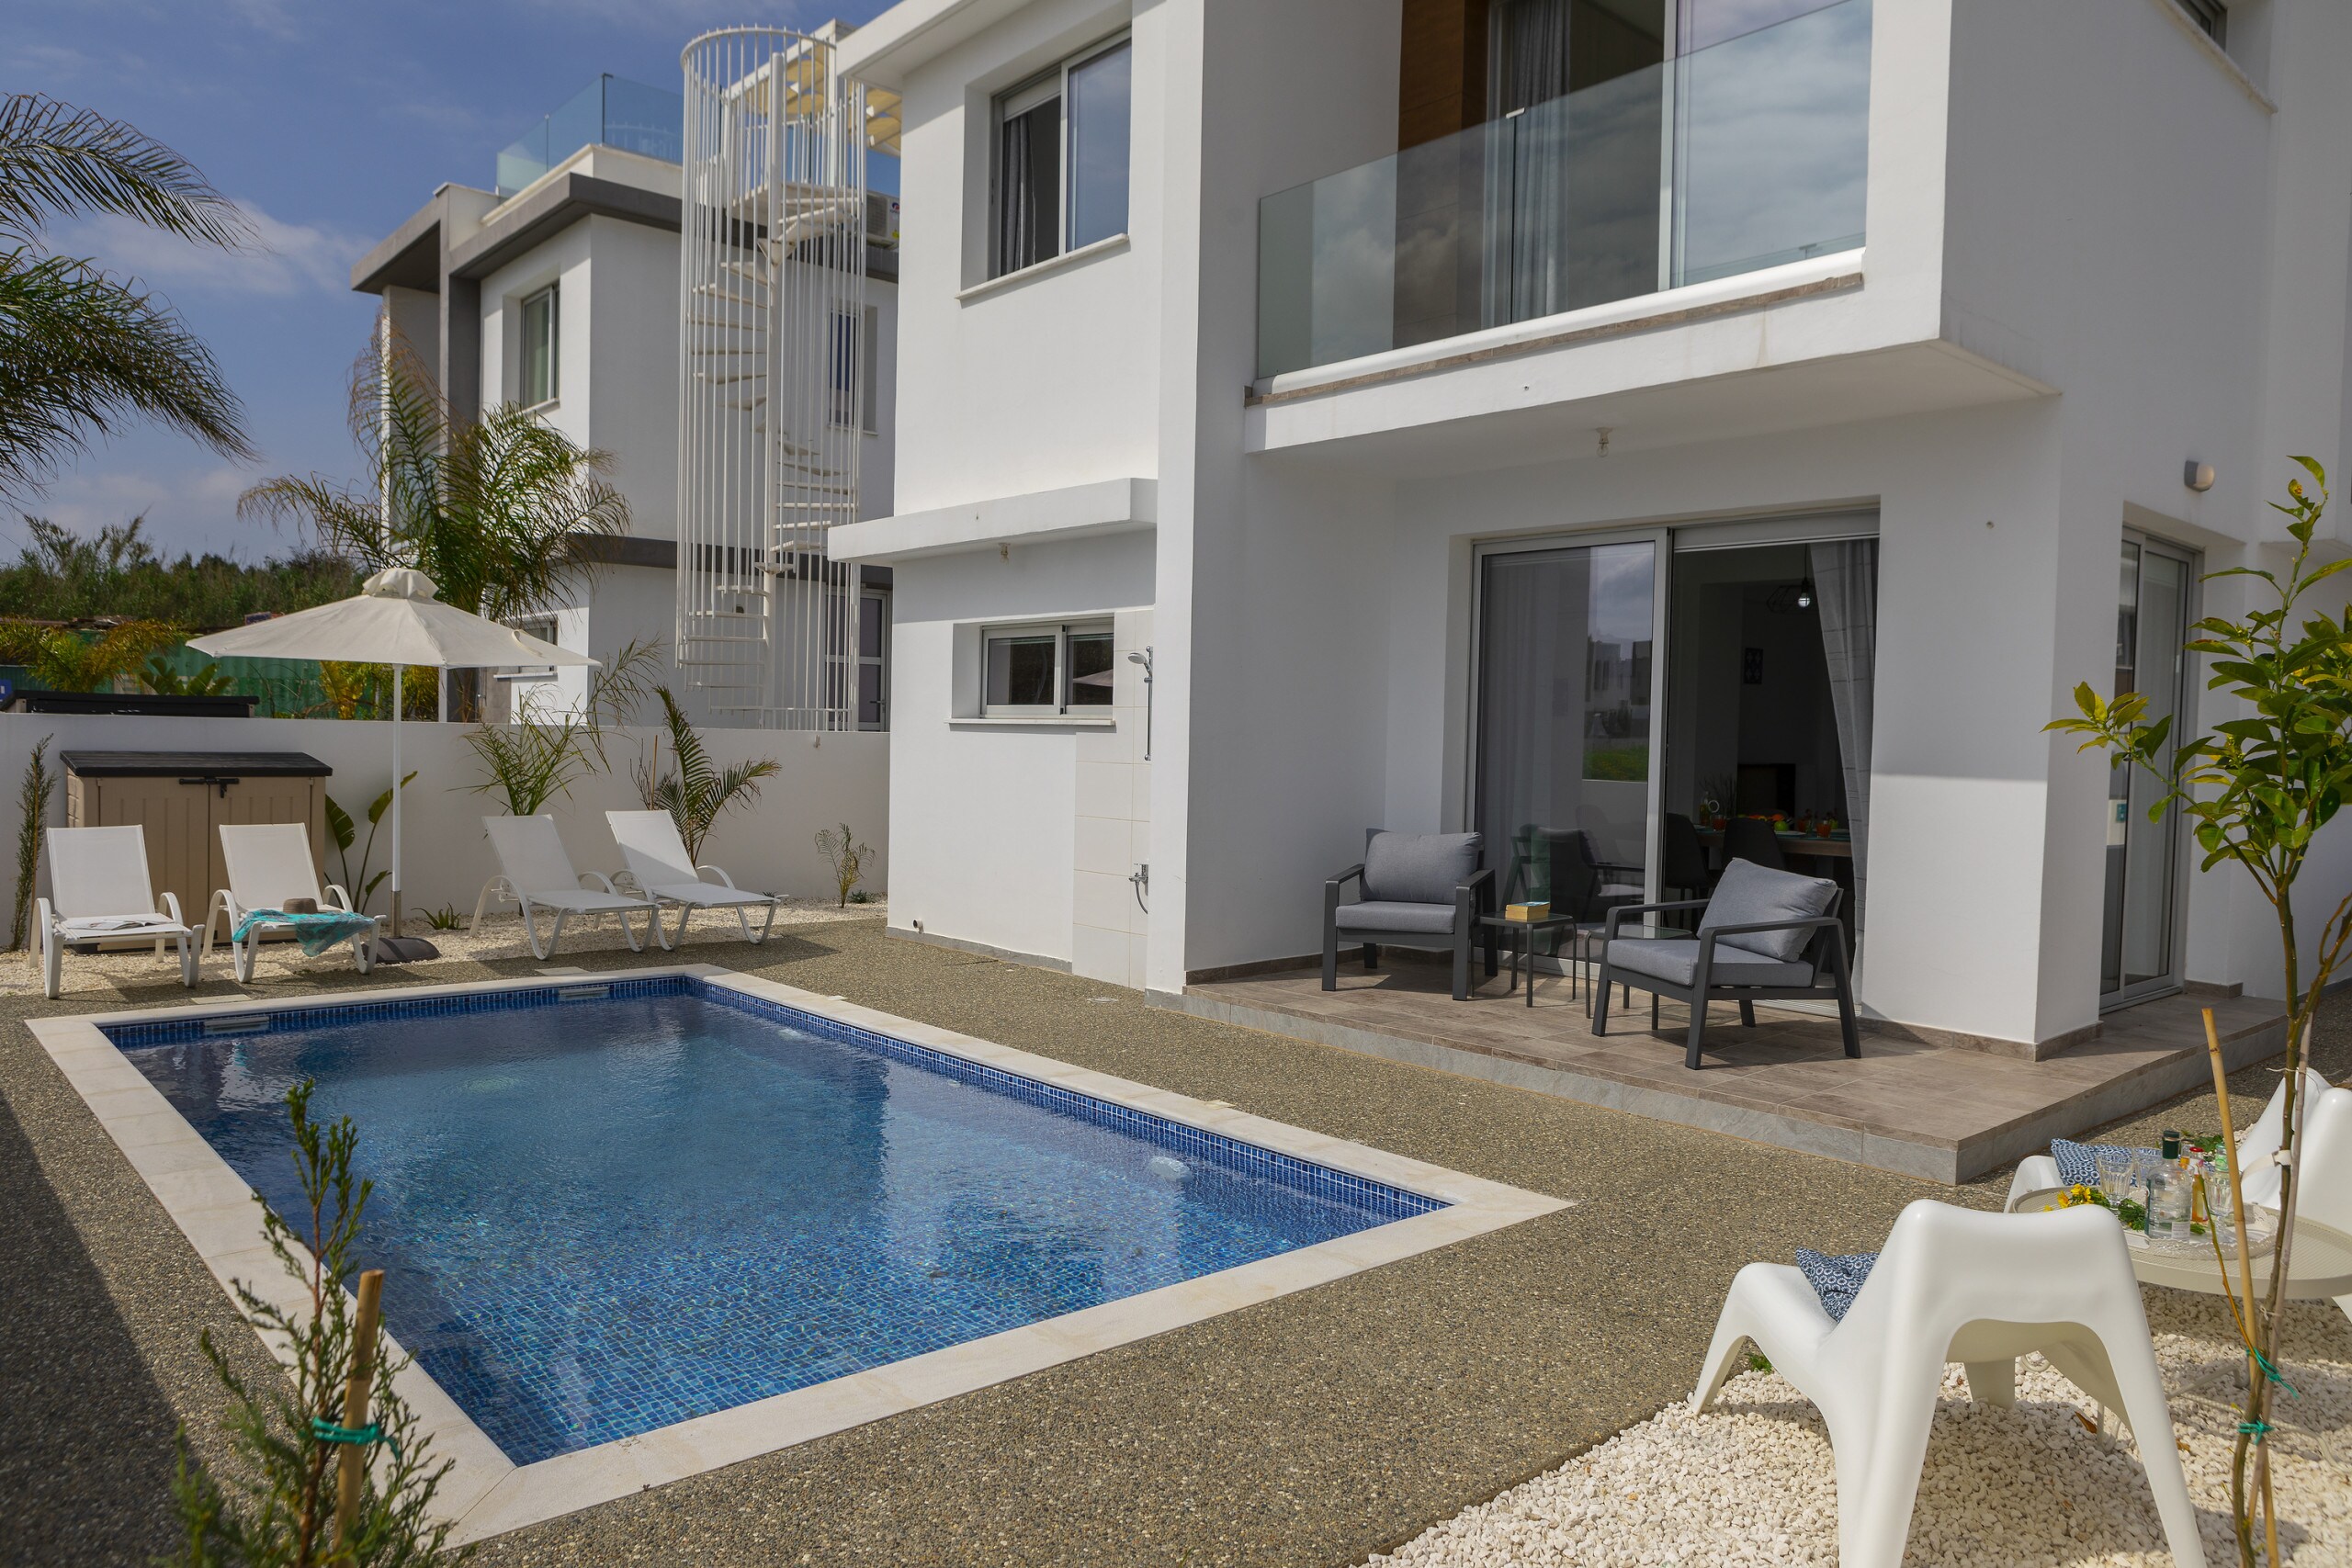 Property Image 2 - Modern and Spacious Holiday Villa in Quiet Kapparis